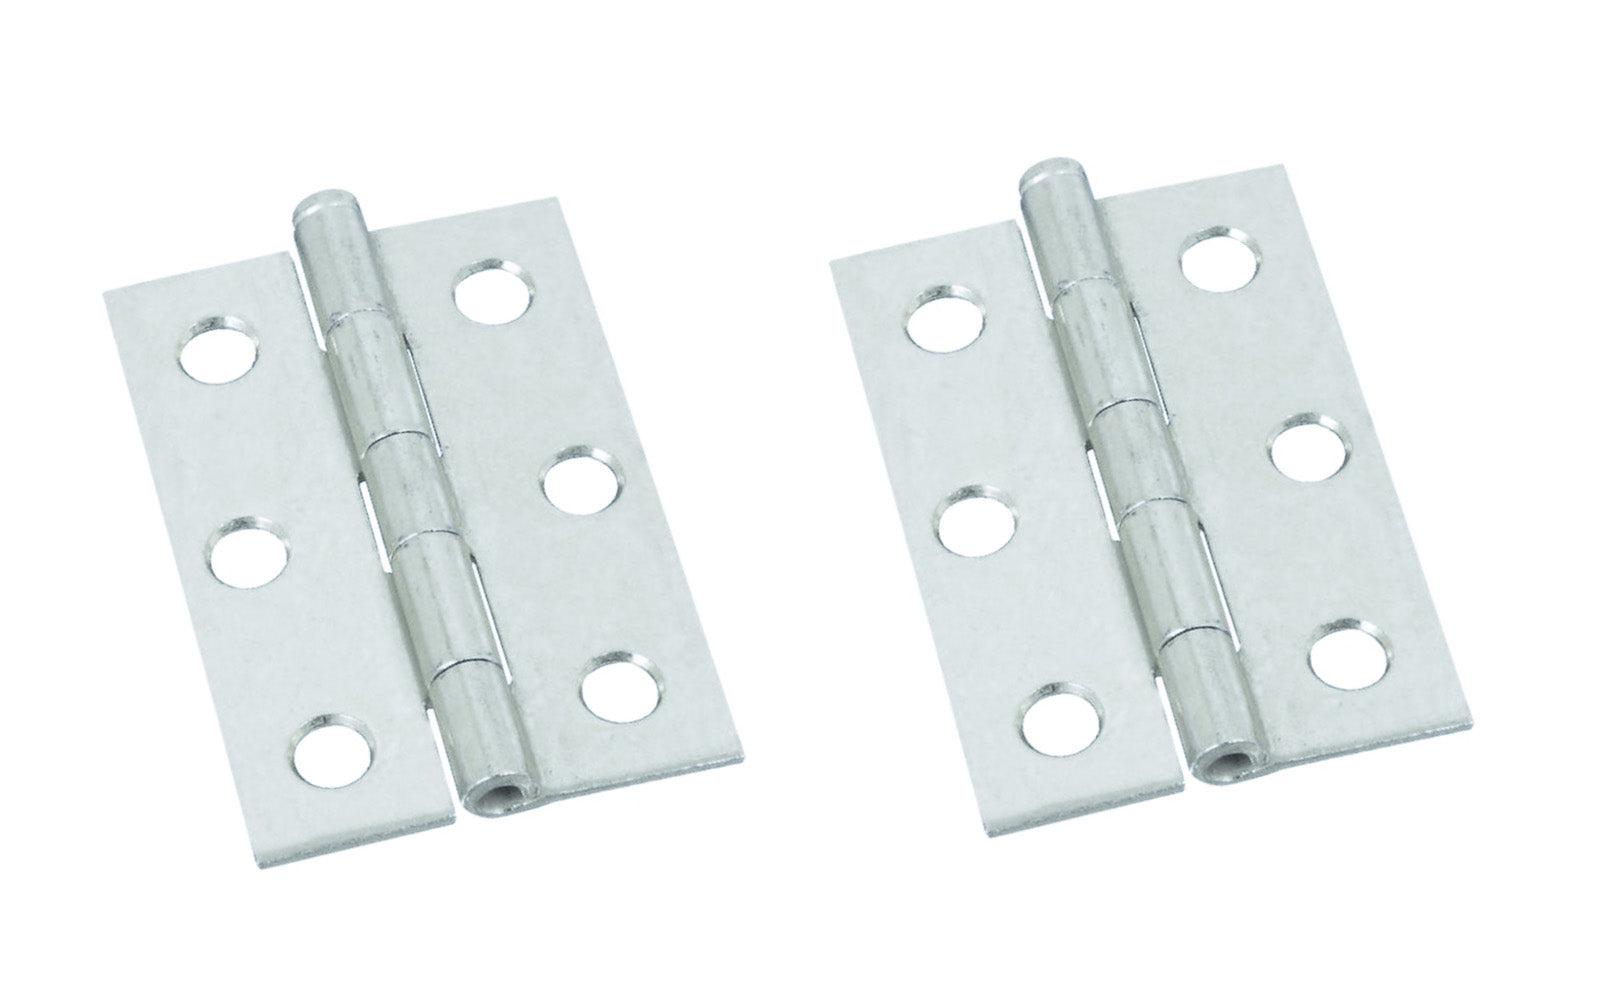 2-1/2" Zinc-Plated Loose-Pin Narrow Hinges - 2 Pack. 2-1/2" high x 1-11/16" wide. Made of cold-rolled steel with zinc plating. Surface mount. Removable pin hinges. Sold as a pair of hinges. National Hardware Model No. N141-945. 038613141940